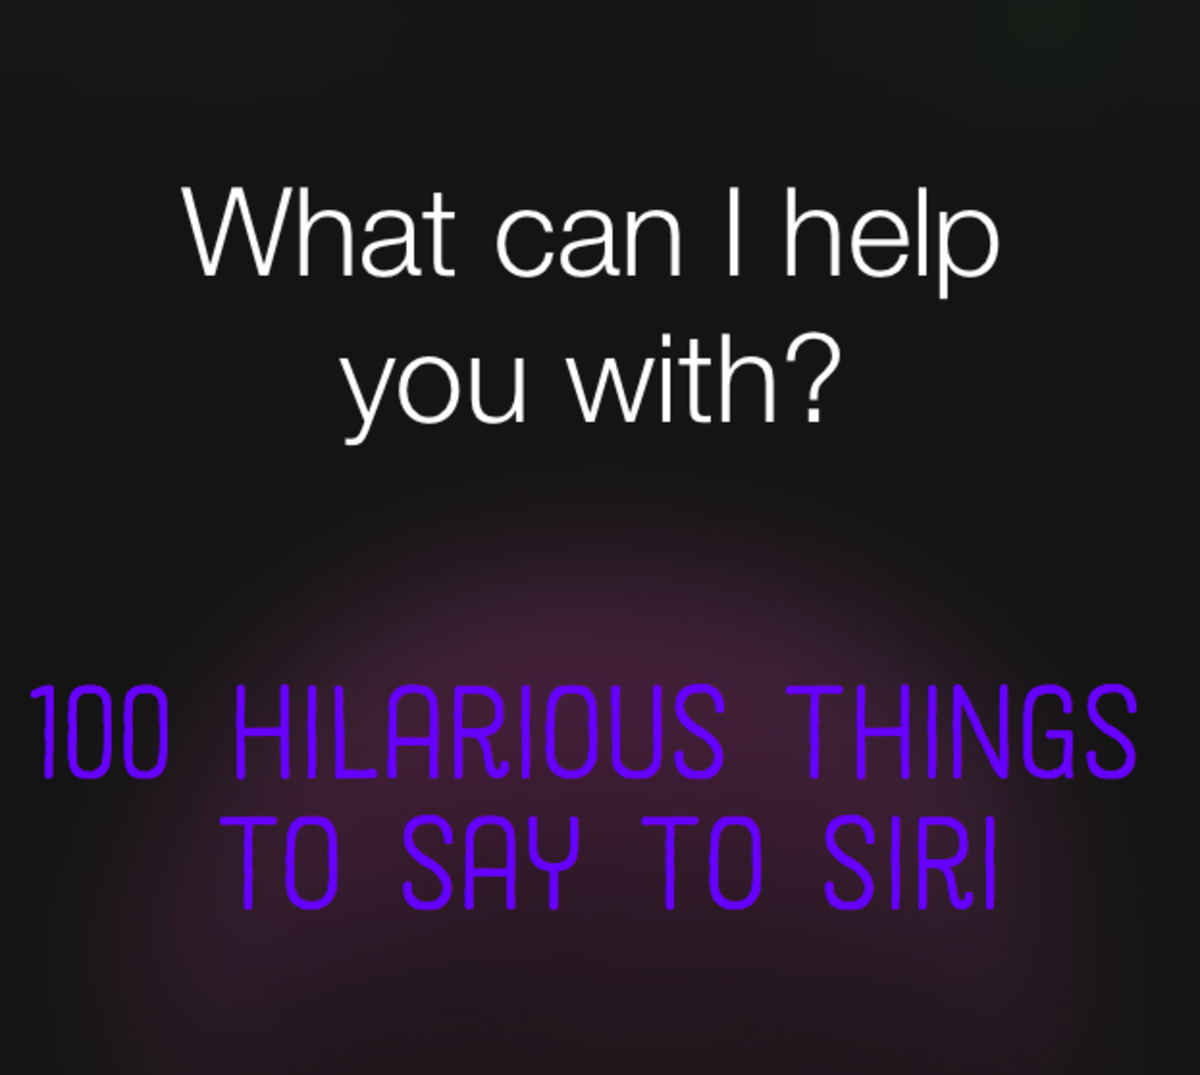 Funny Things To Say To Siri